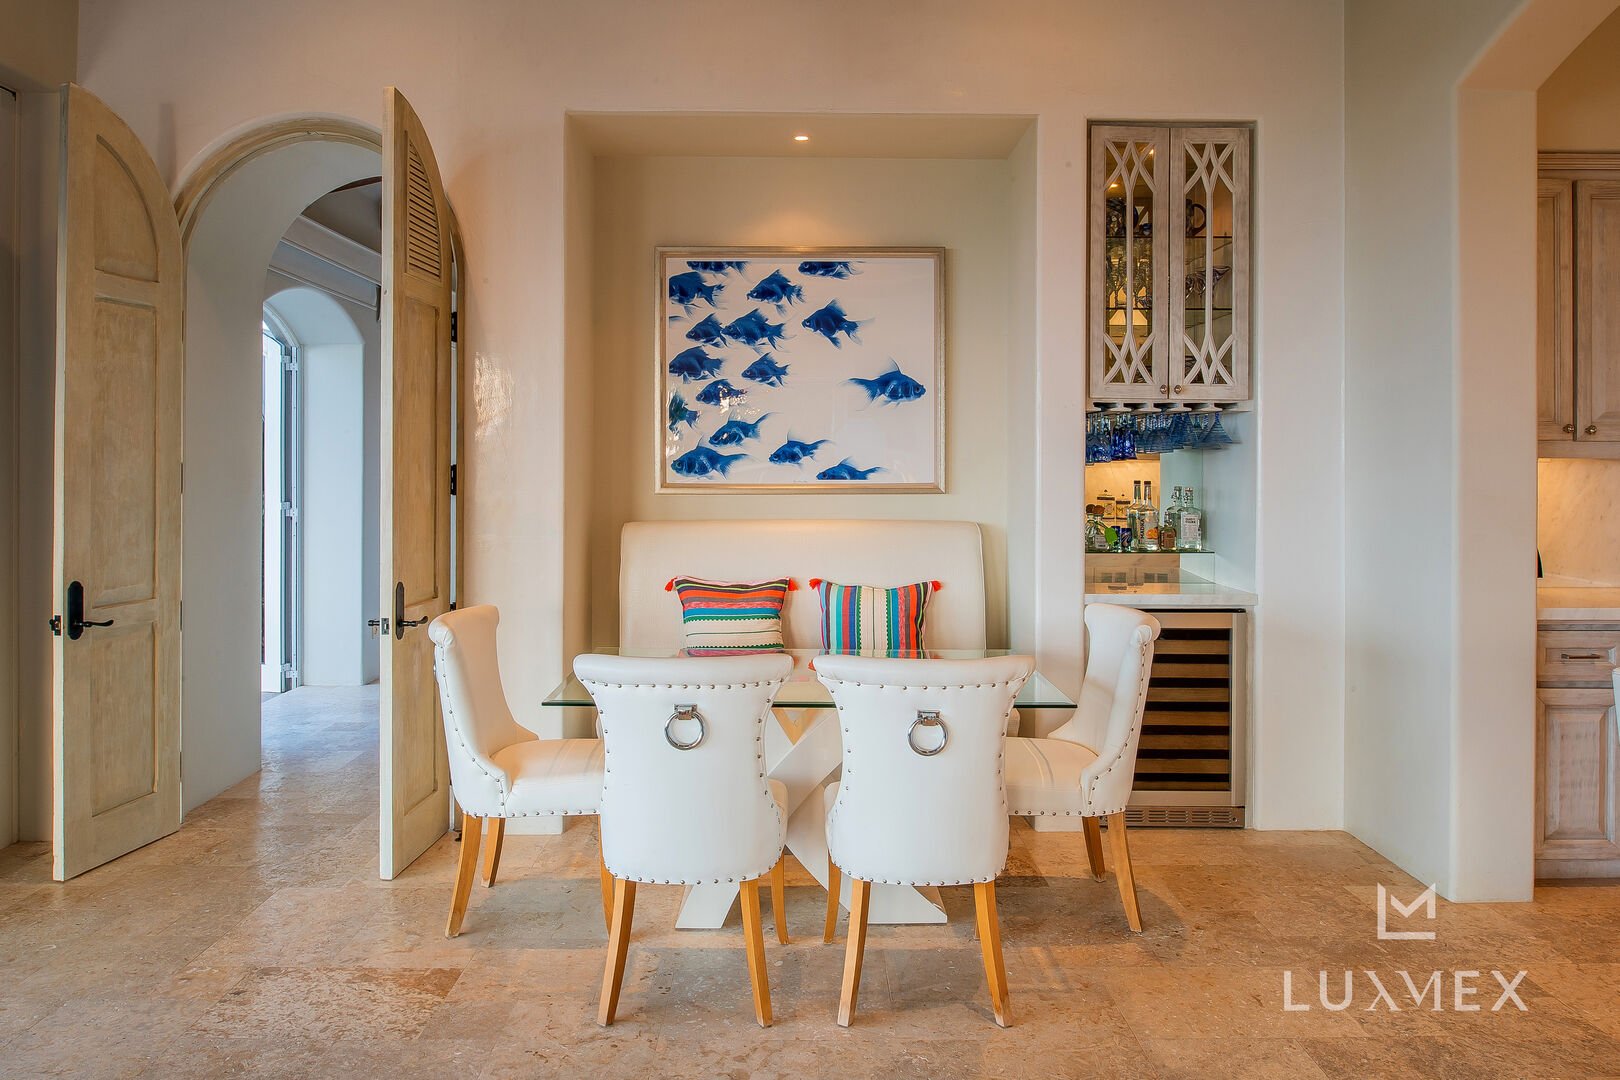 The dining table of Casita 6 sits below a painting of fish on a white background.